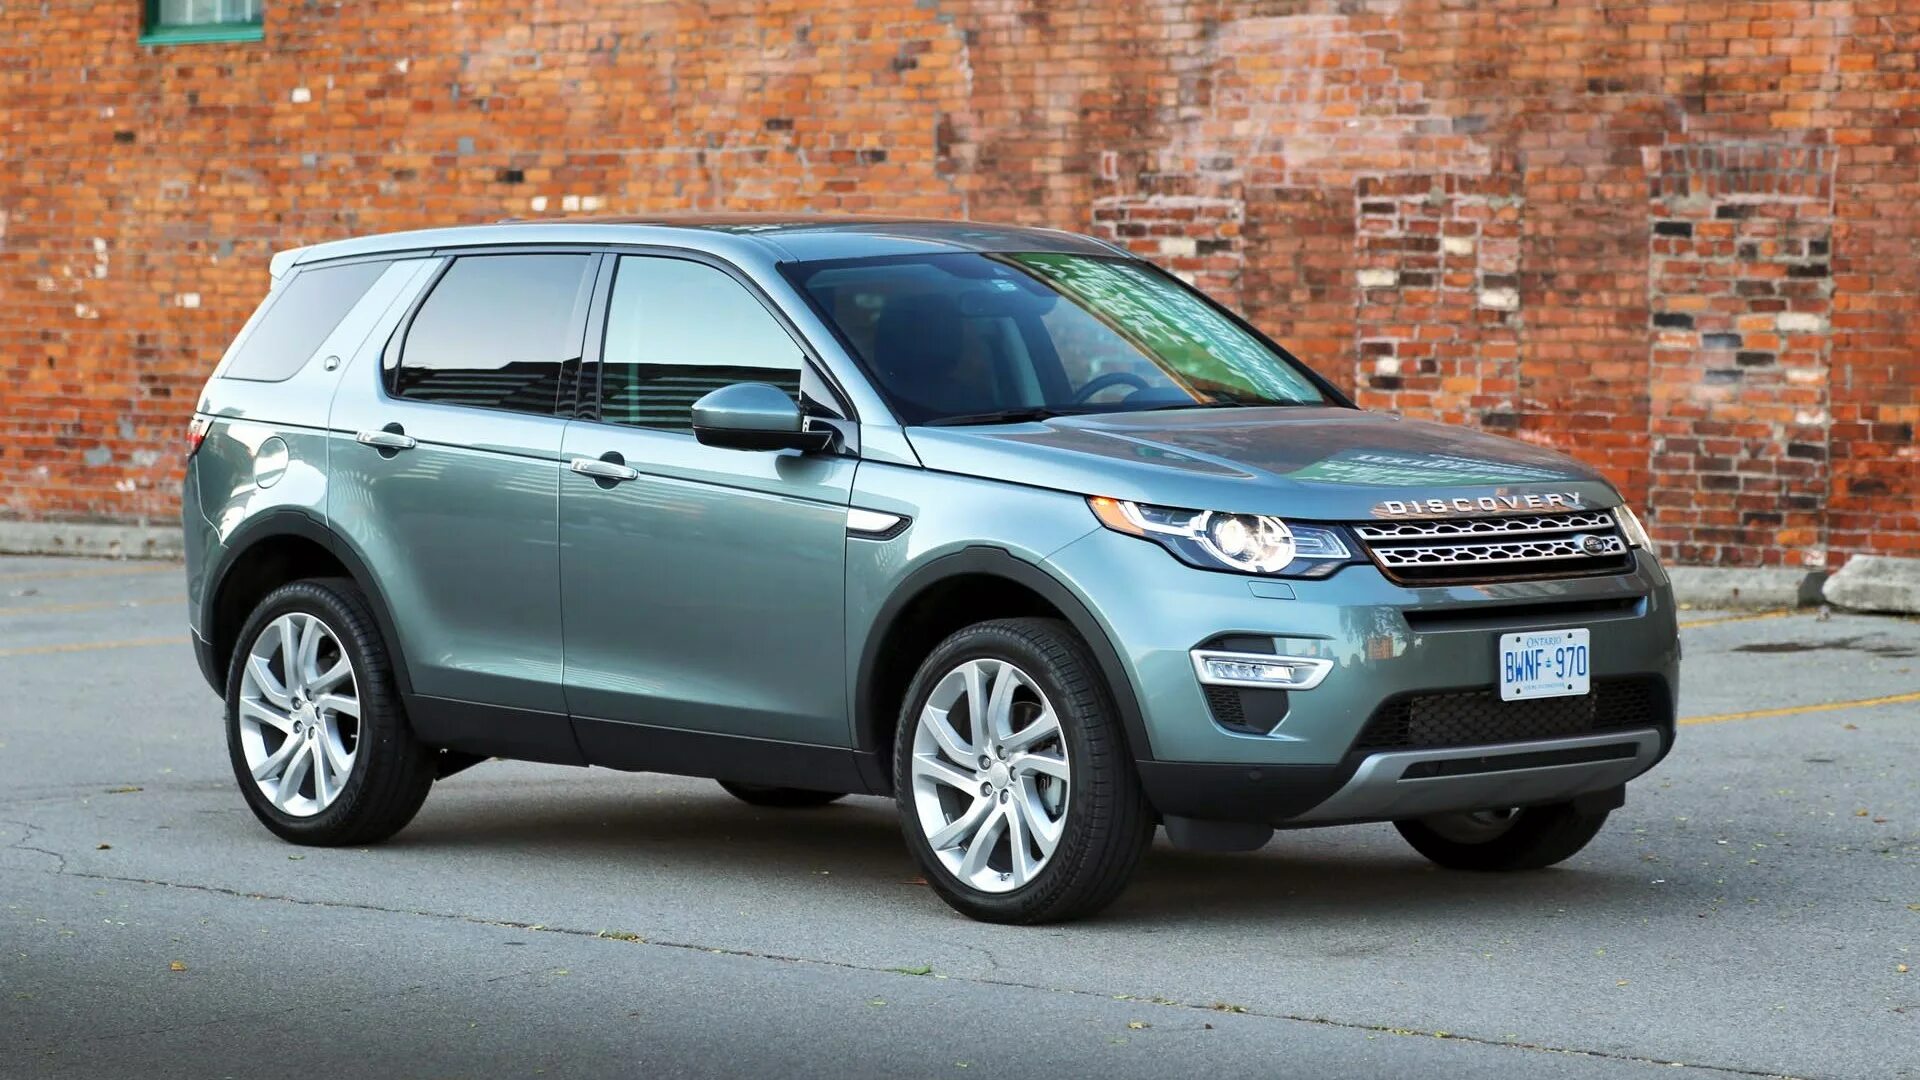 Ленд Ровер Дискавери спорт 2015. Land Rover Discovery Sport 2015. Land Rover Discovery Sport 2014.